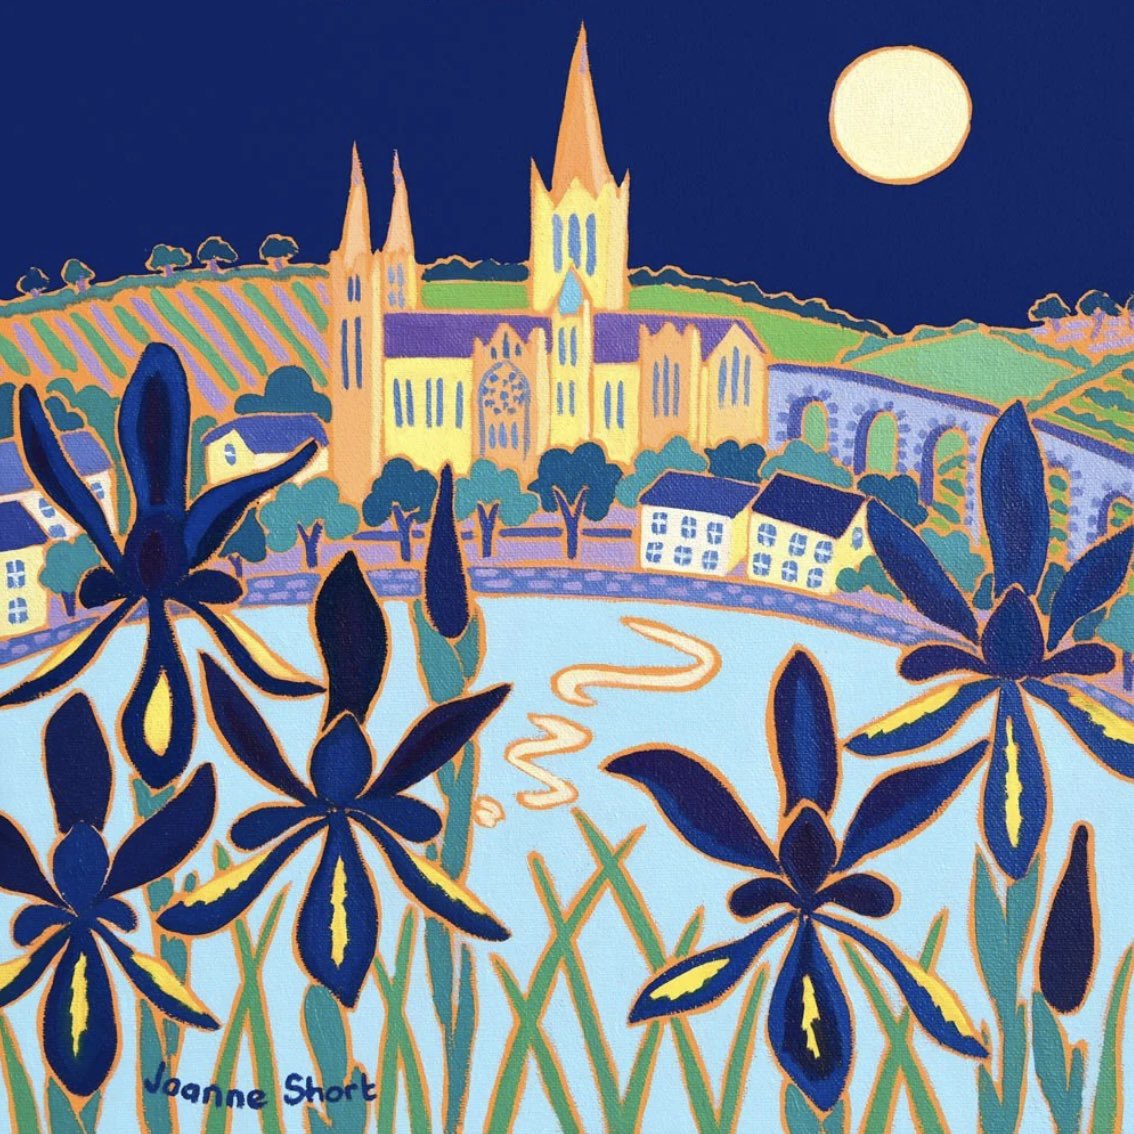 For tonight’s flower full moon I chose this colourful painting as irises are in bloom everywhere at the moment and I love the big, round moon shining a bright light on the cathedral & its surroundings. Nighty night!
Joanne Short (b.1967), English artist 
Moonlit Cathedral, Truro